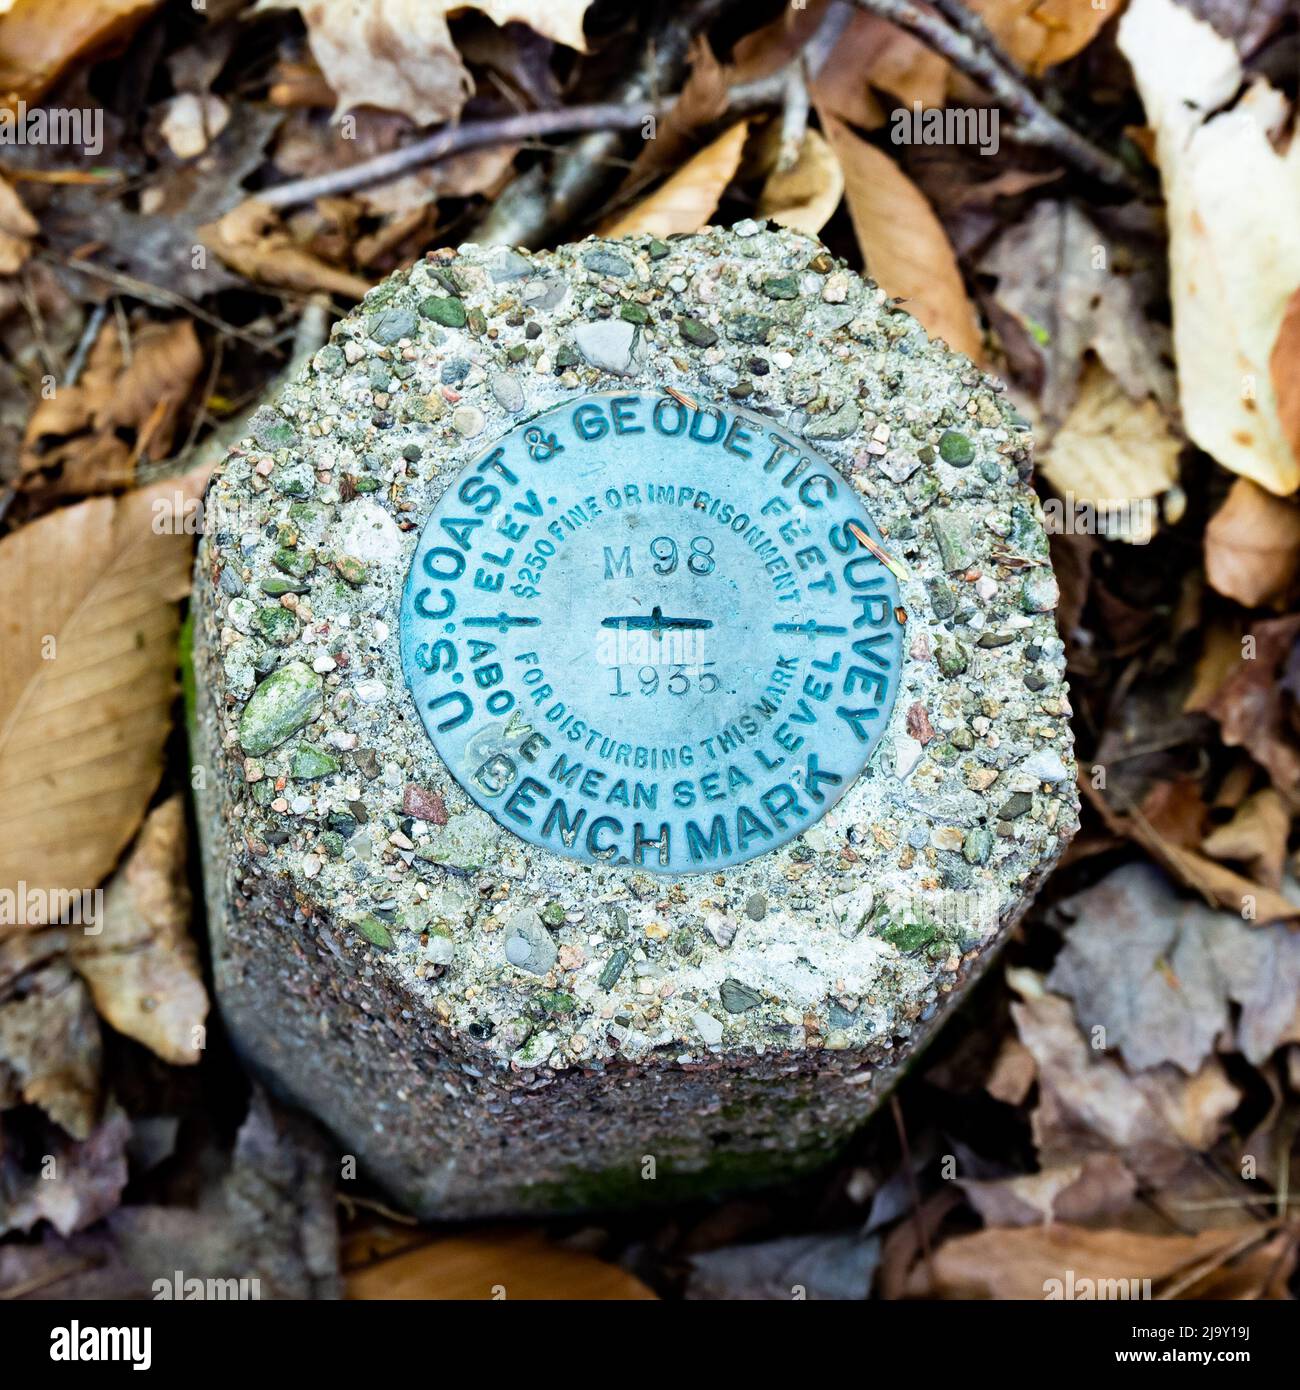 A US Coast and Geodetic Survey Marker Benchmark indicating elevation above mean sea level located in the Adirondack Mountains, New York wilderness Stock Photo